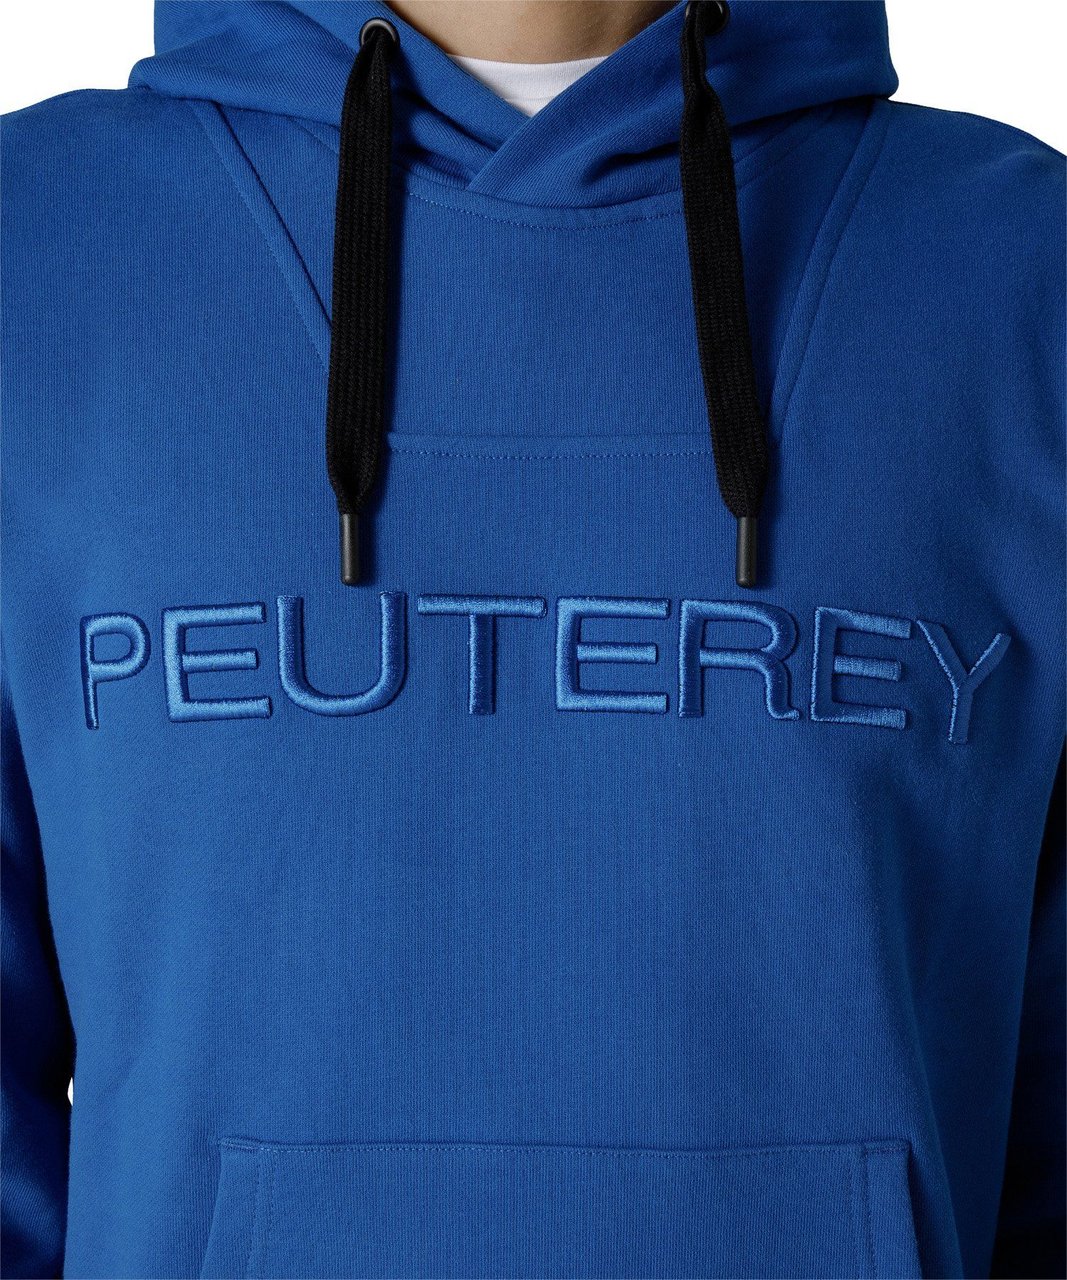 Peuterey Hooded sweatshirt with front lettering Blauw